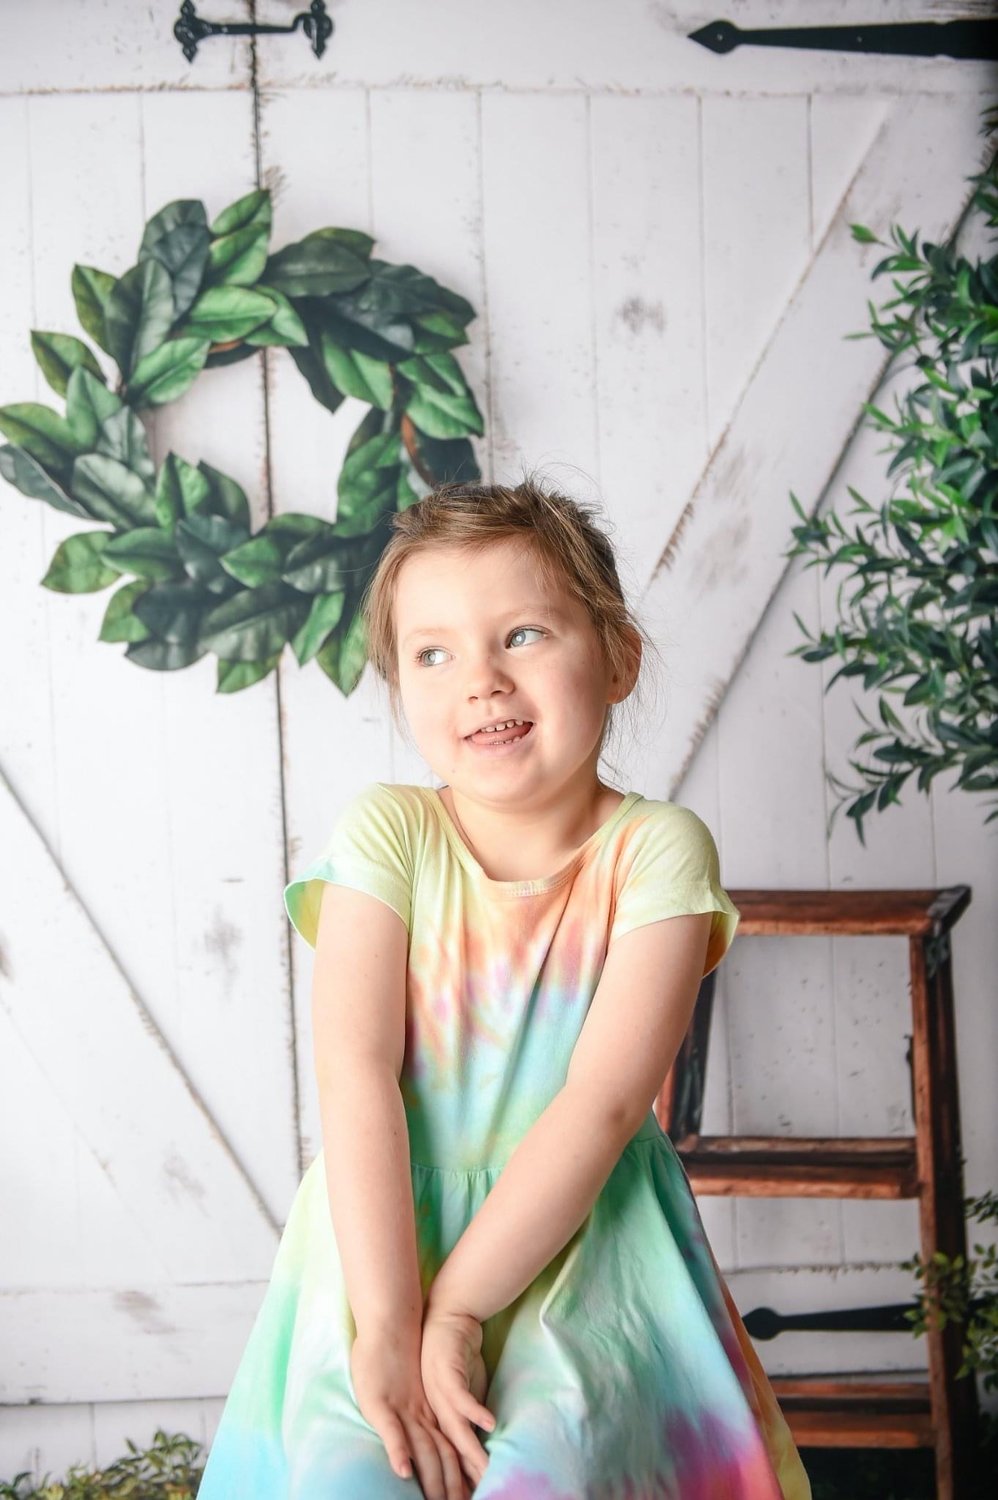 Kenzie Scoggins, 5, poses for a portrait. Kenzie died from an aggressive childhood brain tumor called diffuse pontine glioma on Sept. 18. Her mother, Meghan, called Kenzie 'their tie-dye hippie chick.'